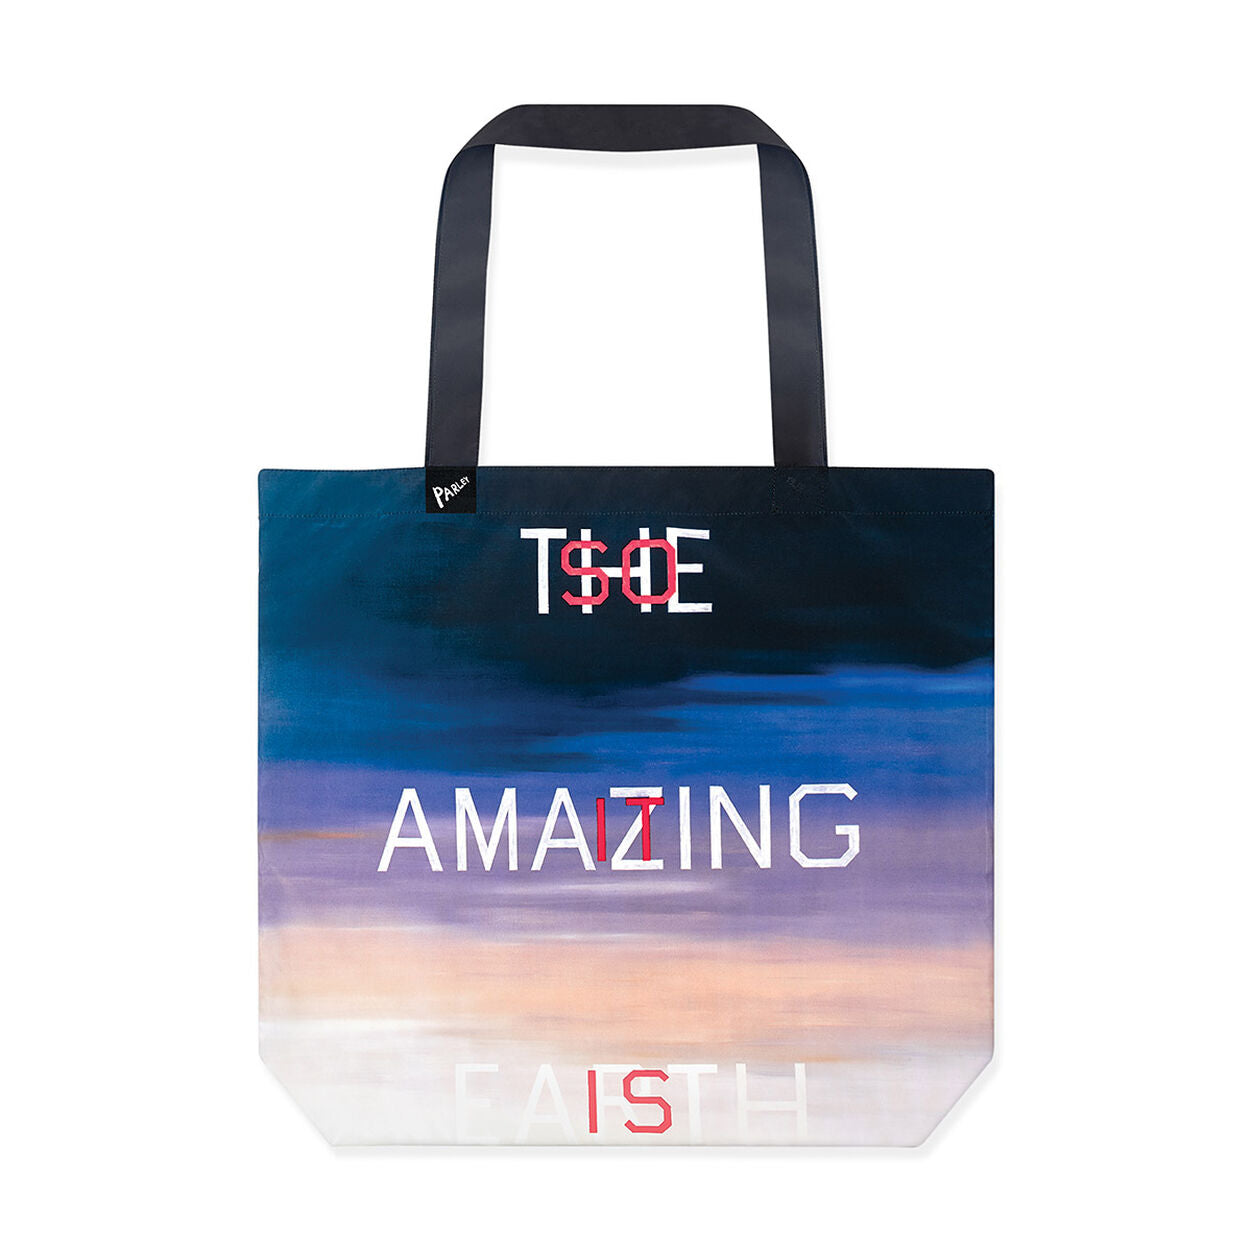 Ed Ruscha Parley for the Oceans Tote